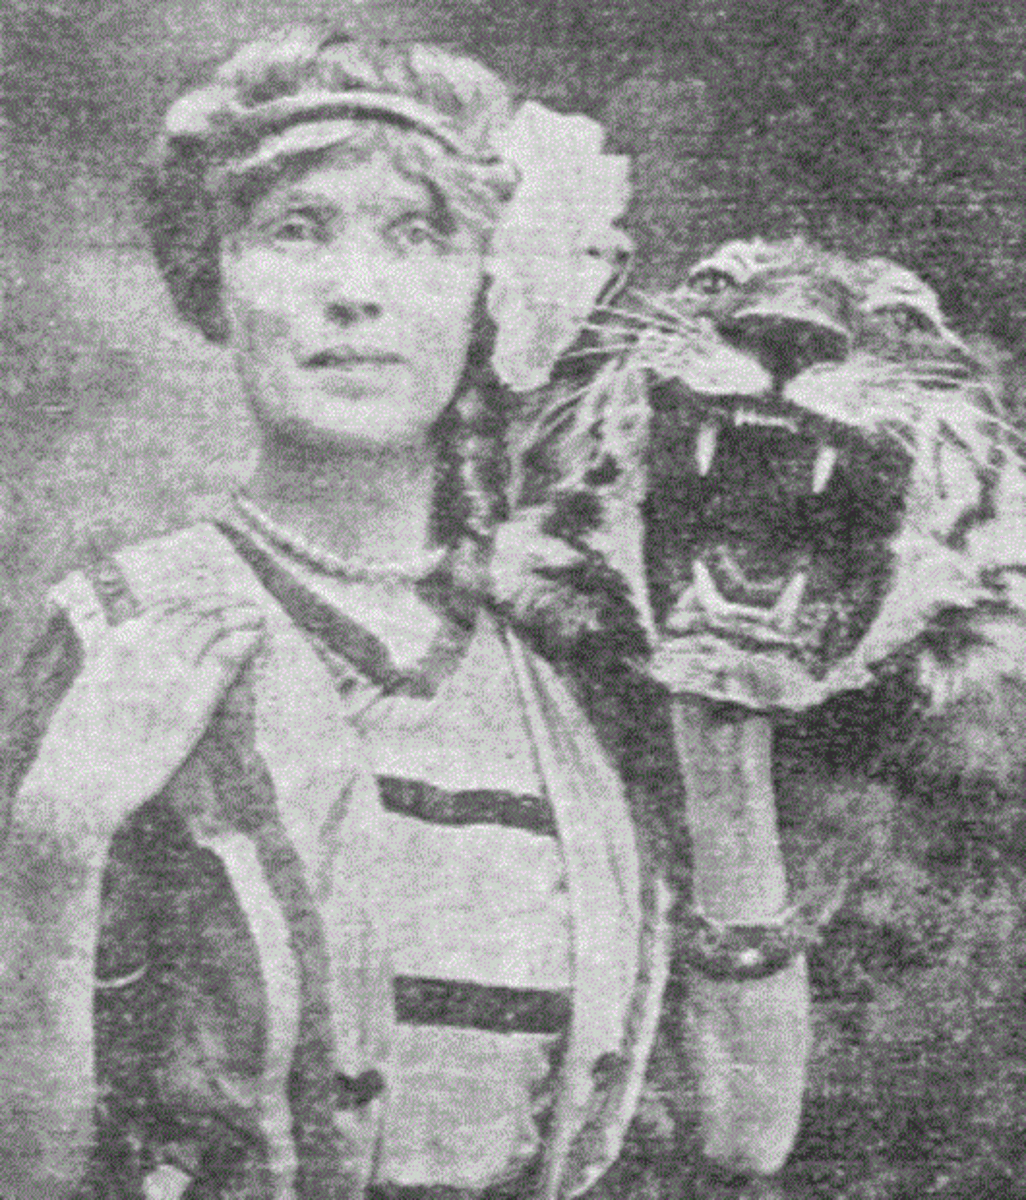 Mabel Stark and one of her favorite tigers. In 1916, she adopted an orphan Bengal tiger cub as her own and named him Rajah. 